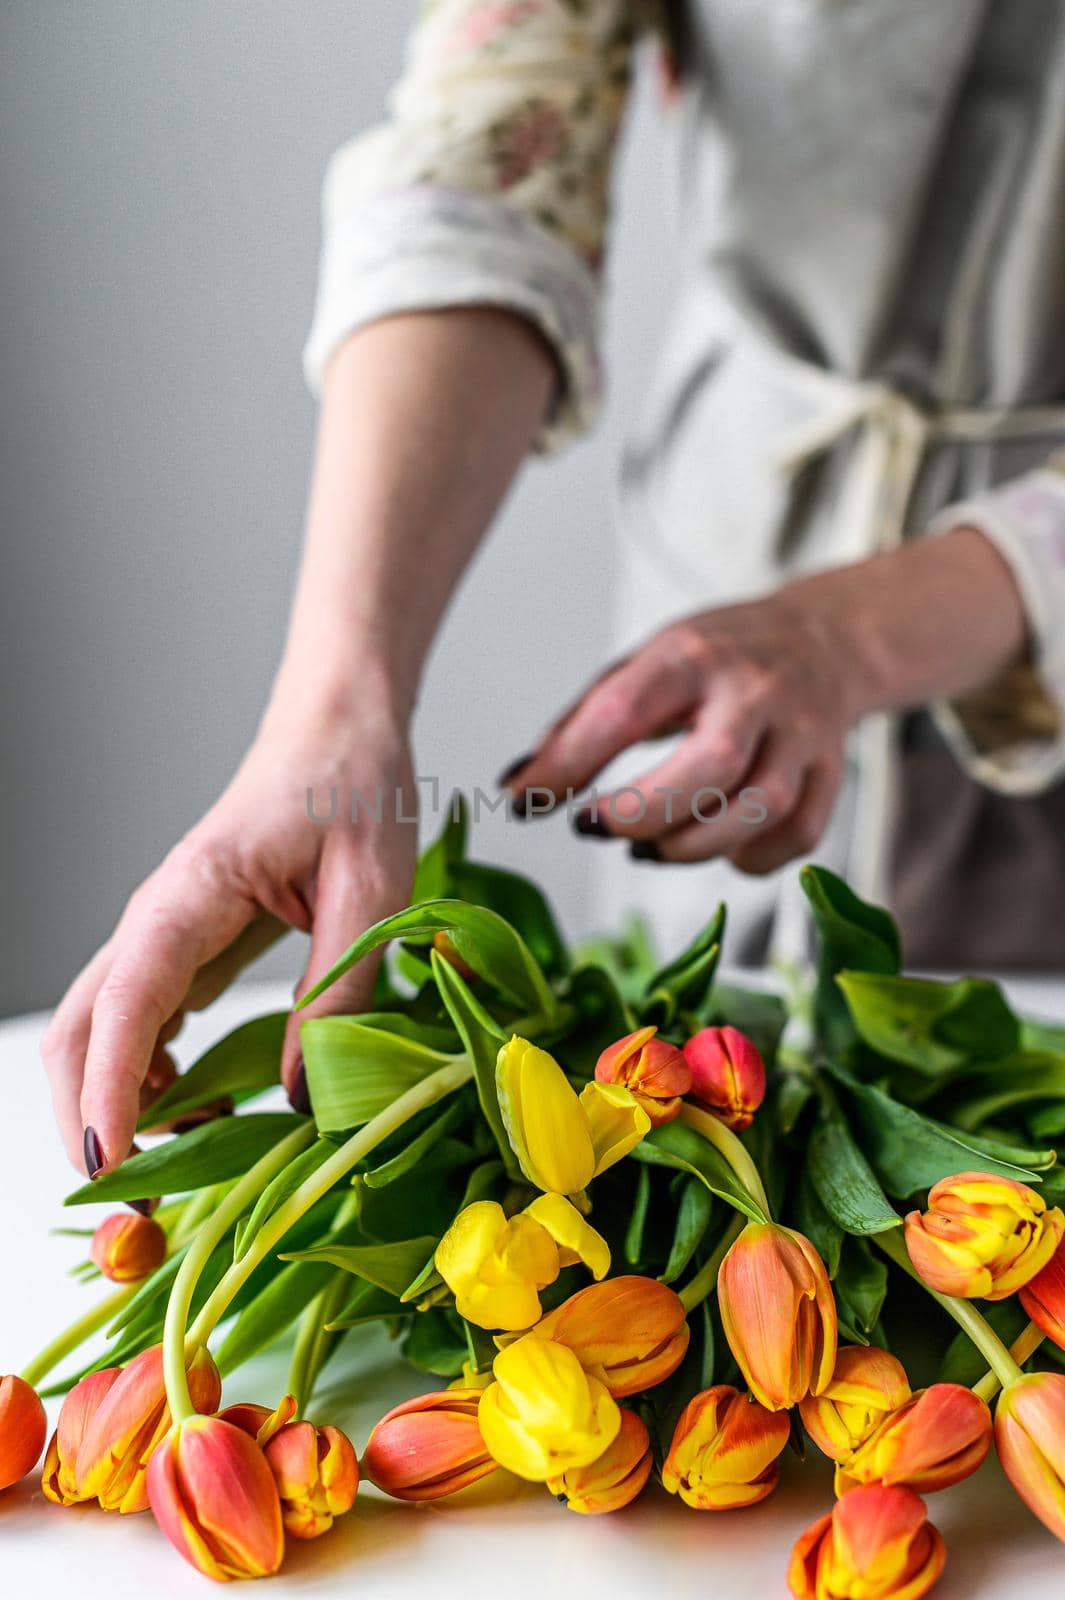 Florist at work. Woman making bouquet of spring tulips flowers. White background.